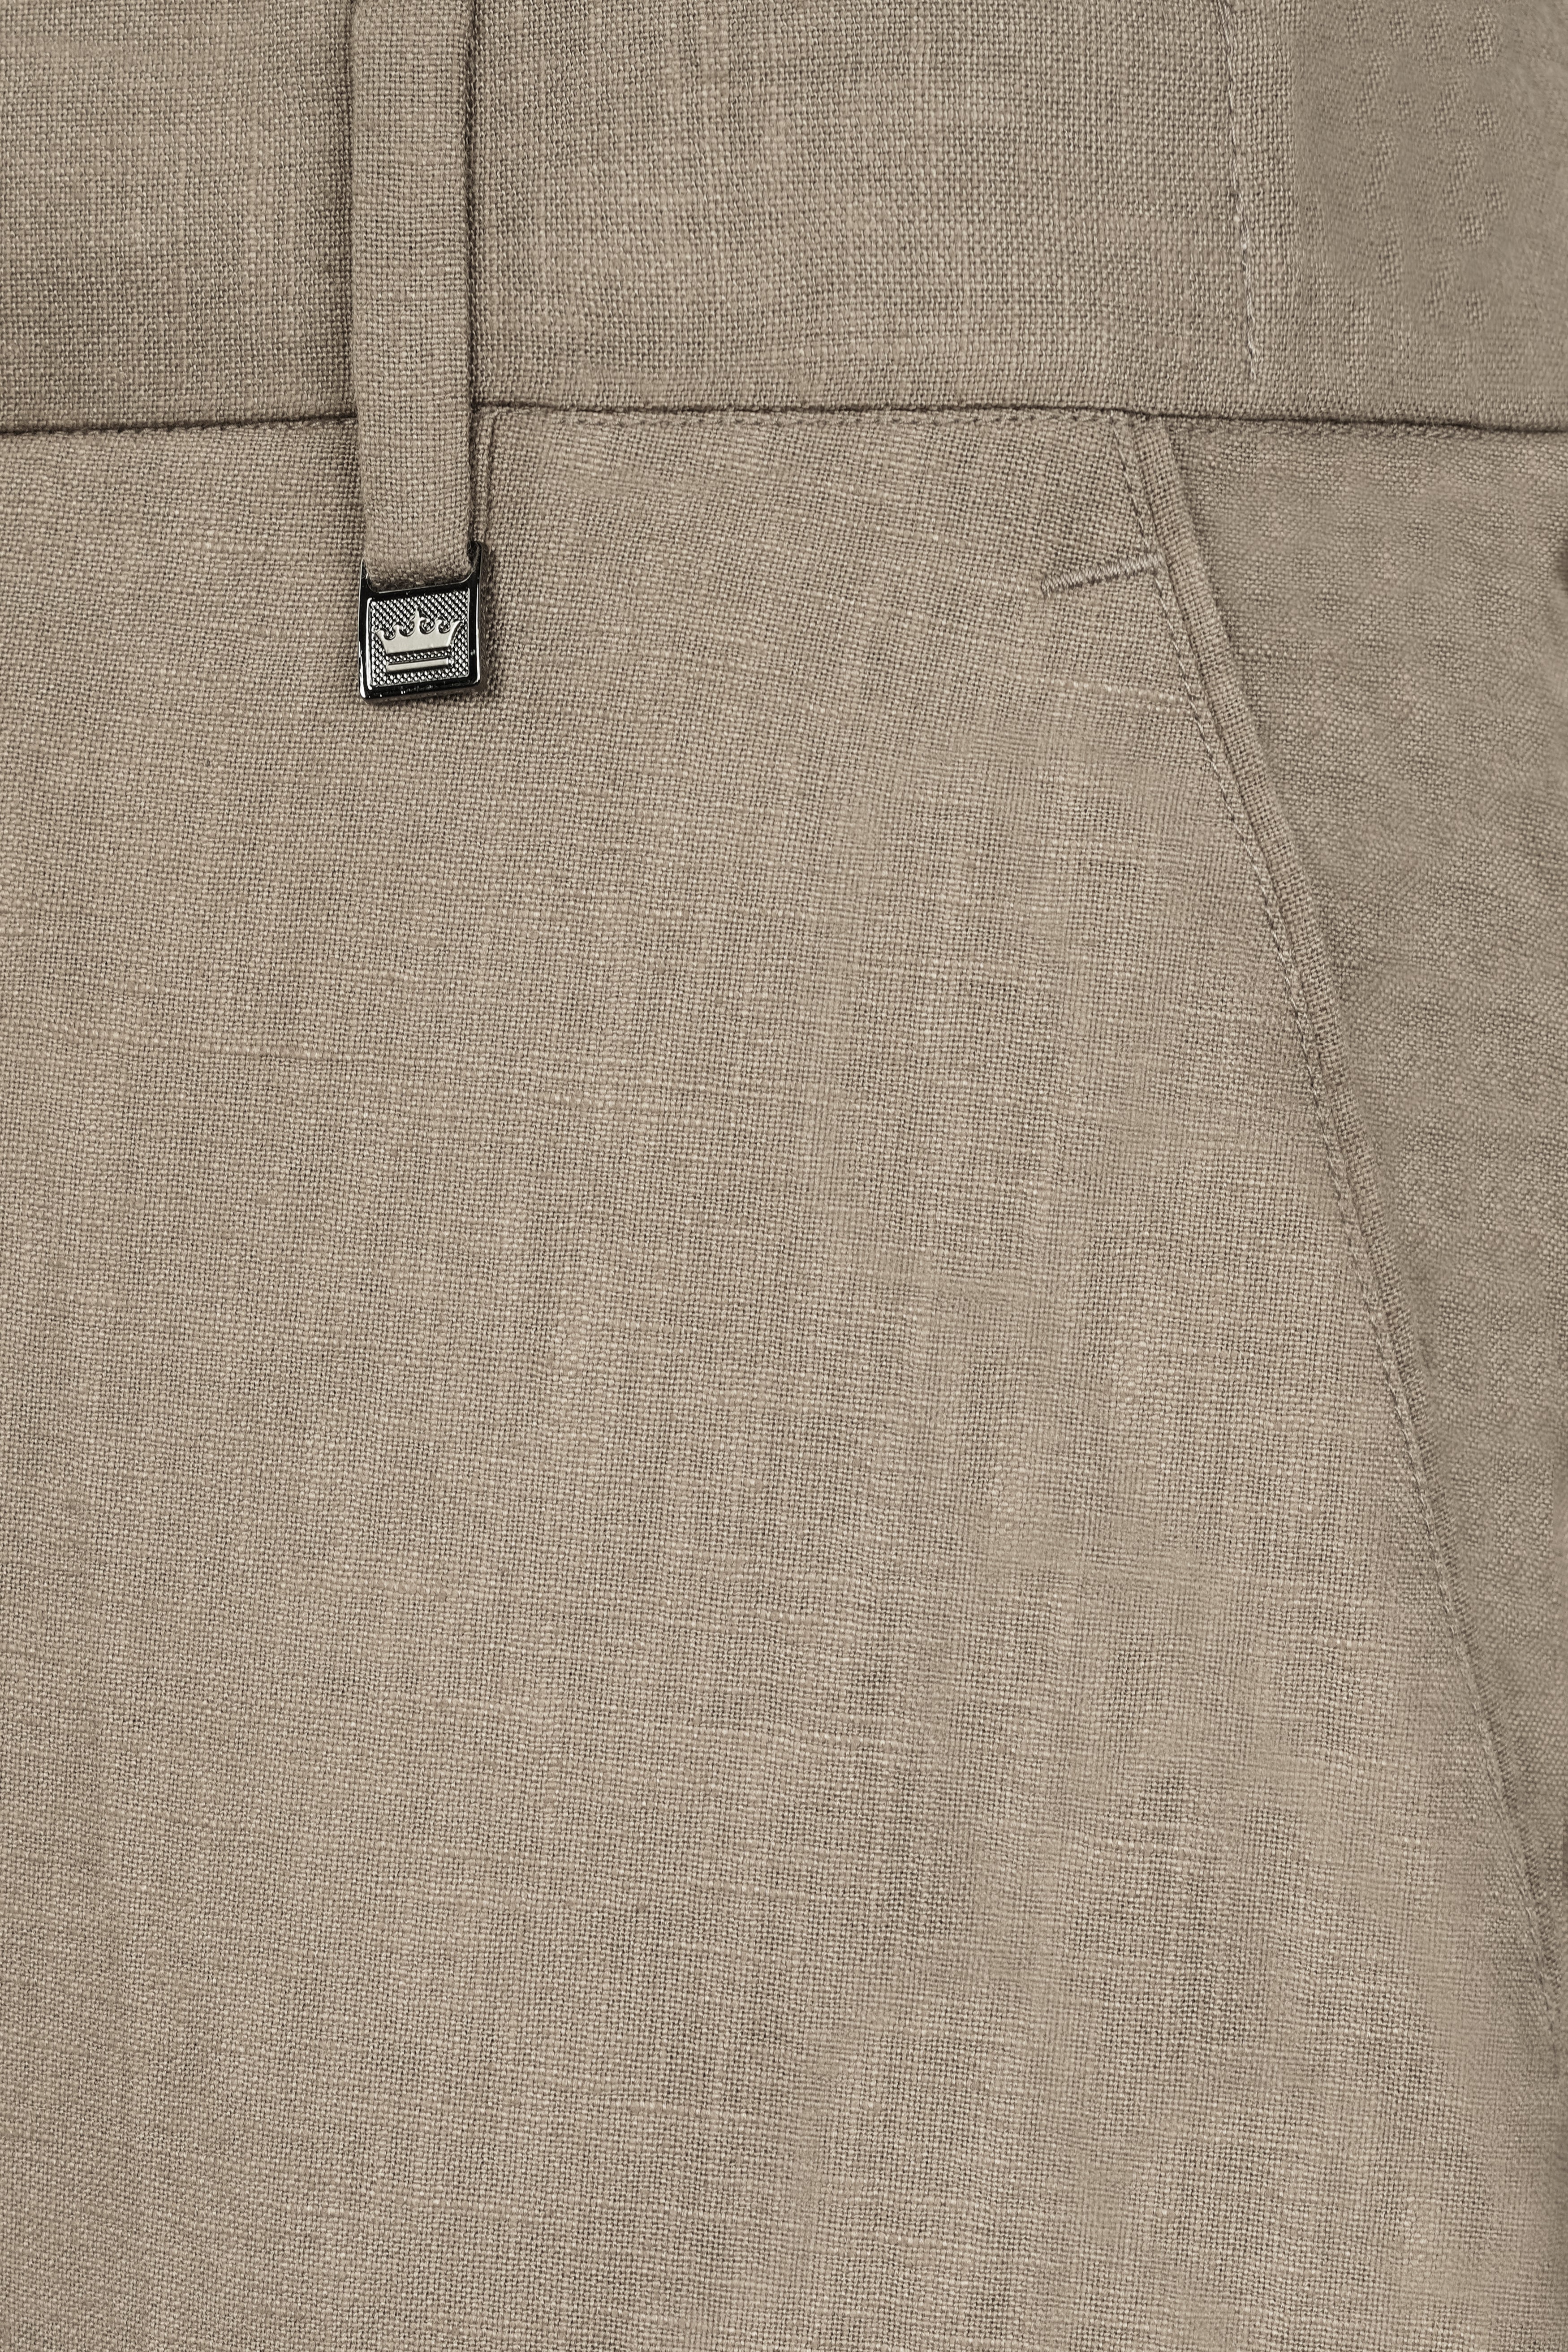 Oyster Brown Luxurious Linen Stretchable Waistband Pant